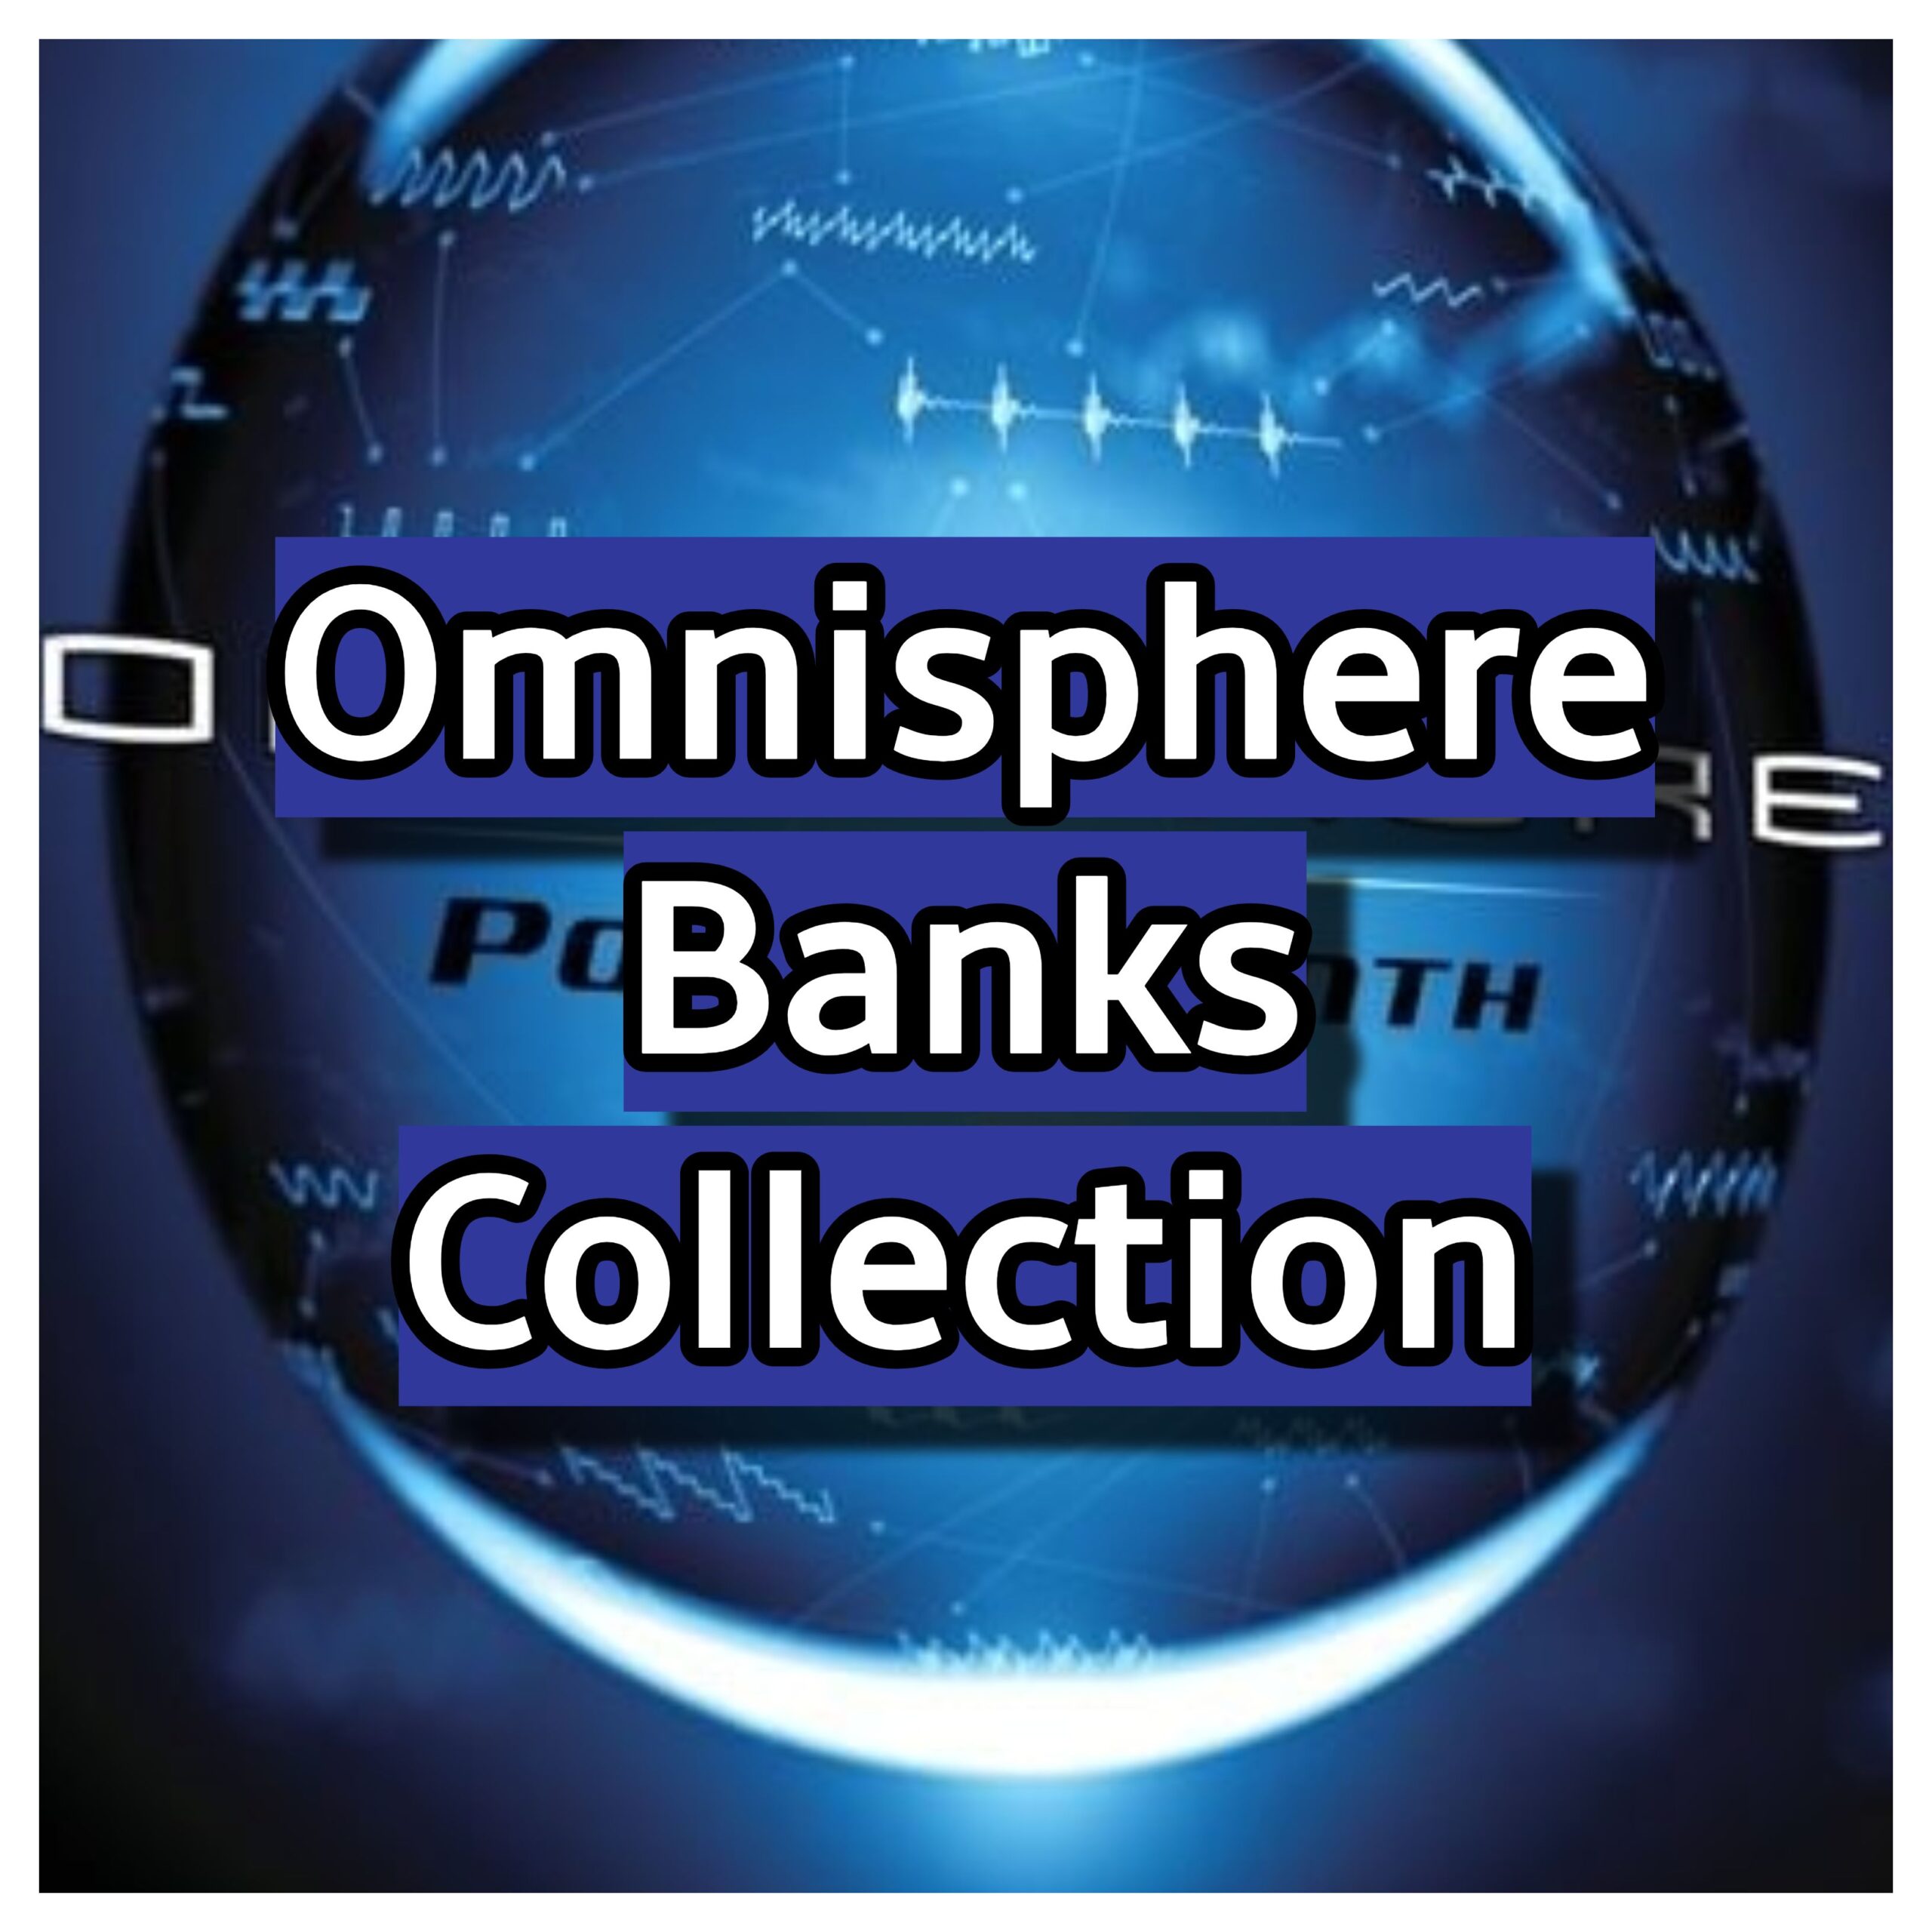 Omnisphere Banks Collection Free Download